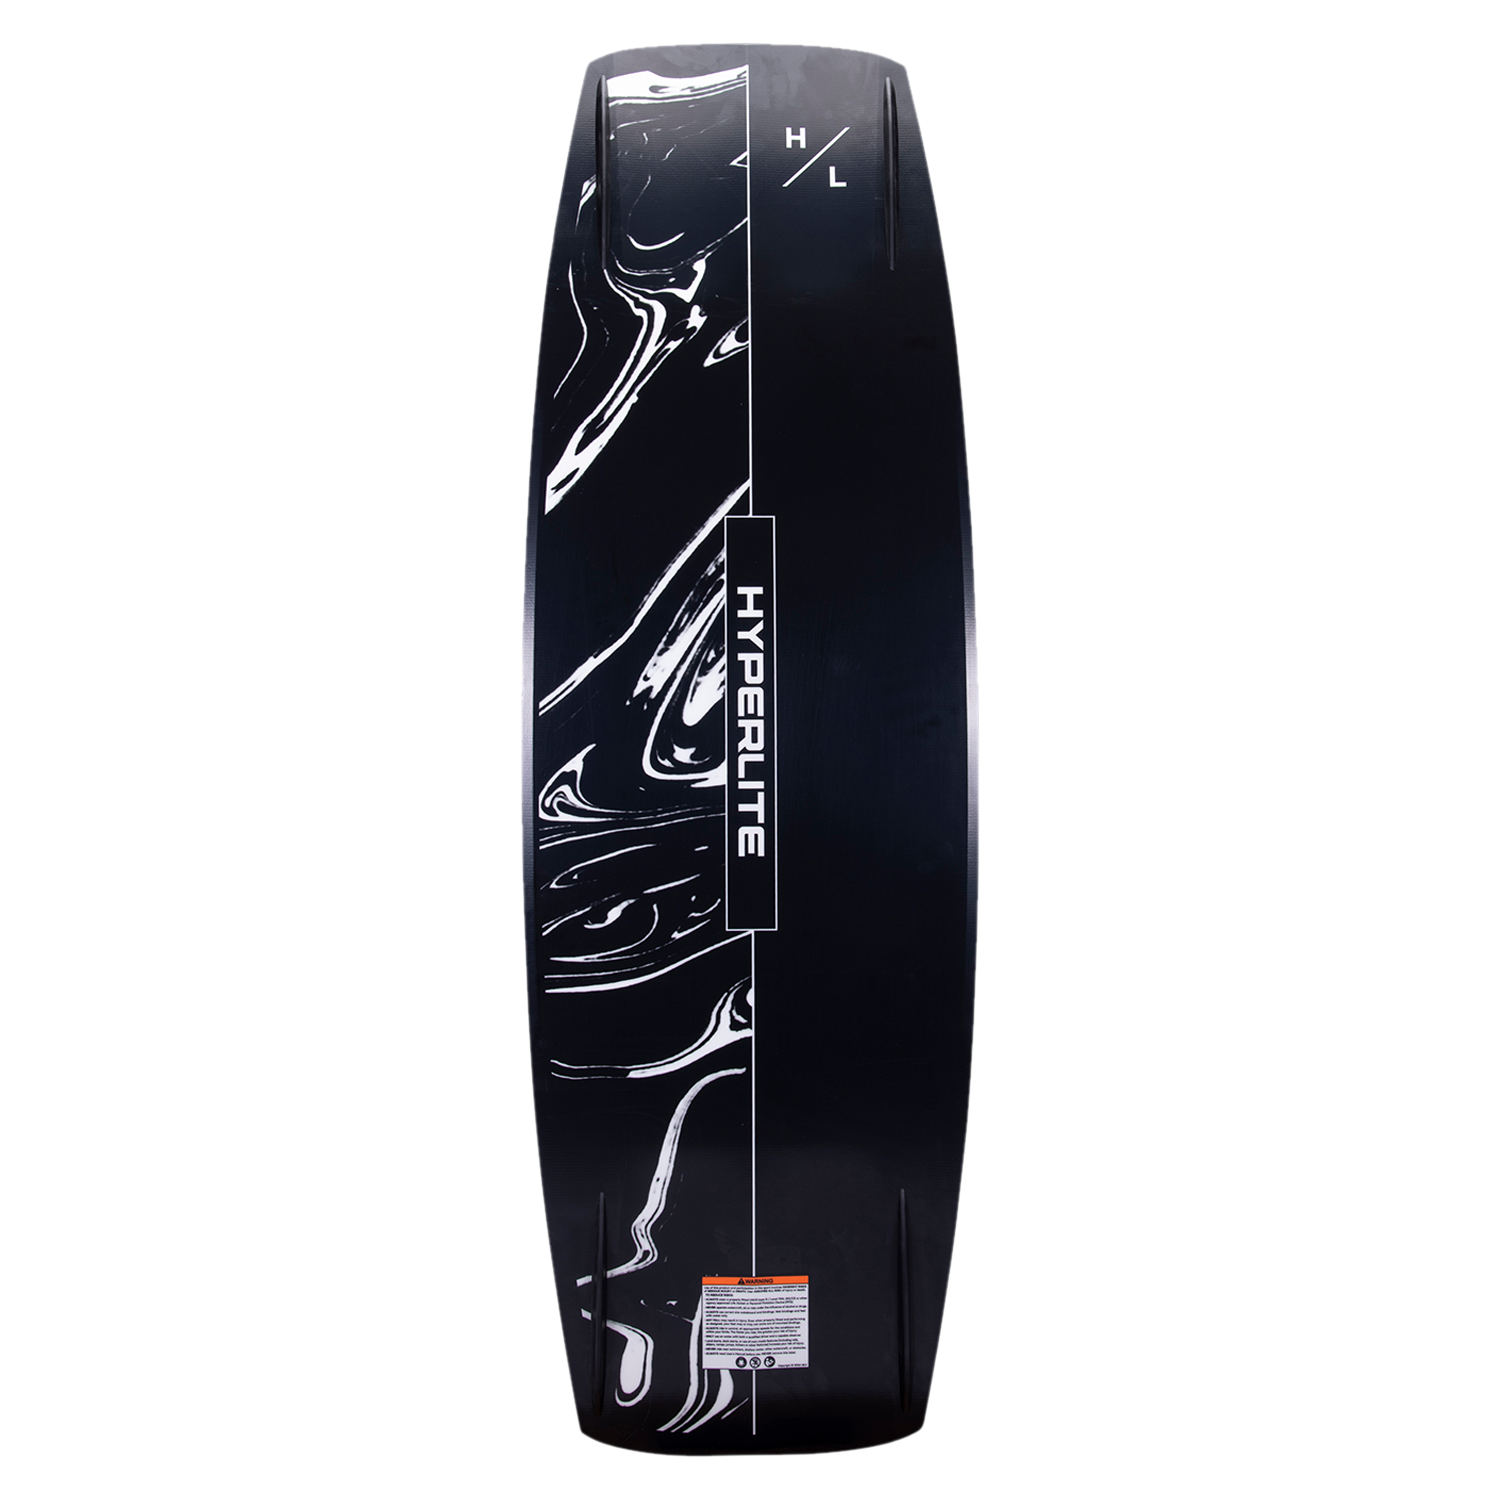 A Hyperlite 2023 Cryptic wakeboard by Josh Twelker on a white background.